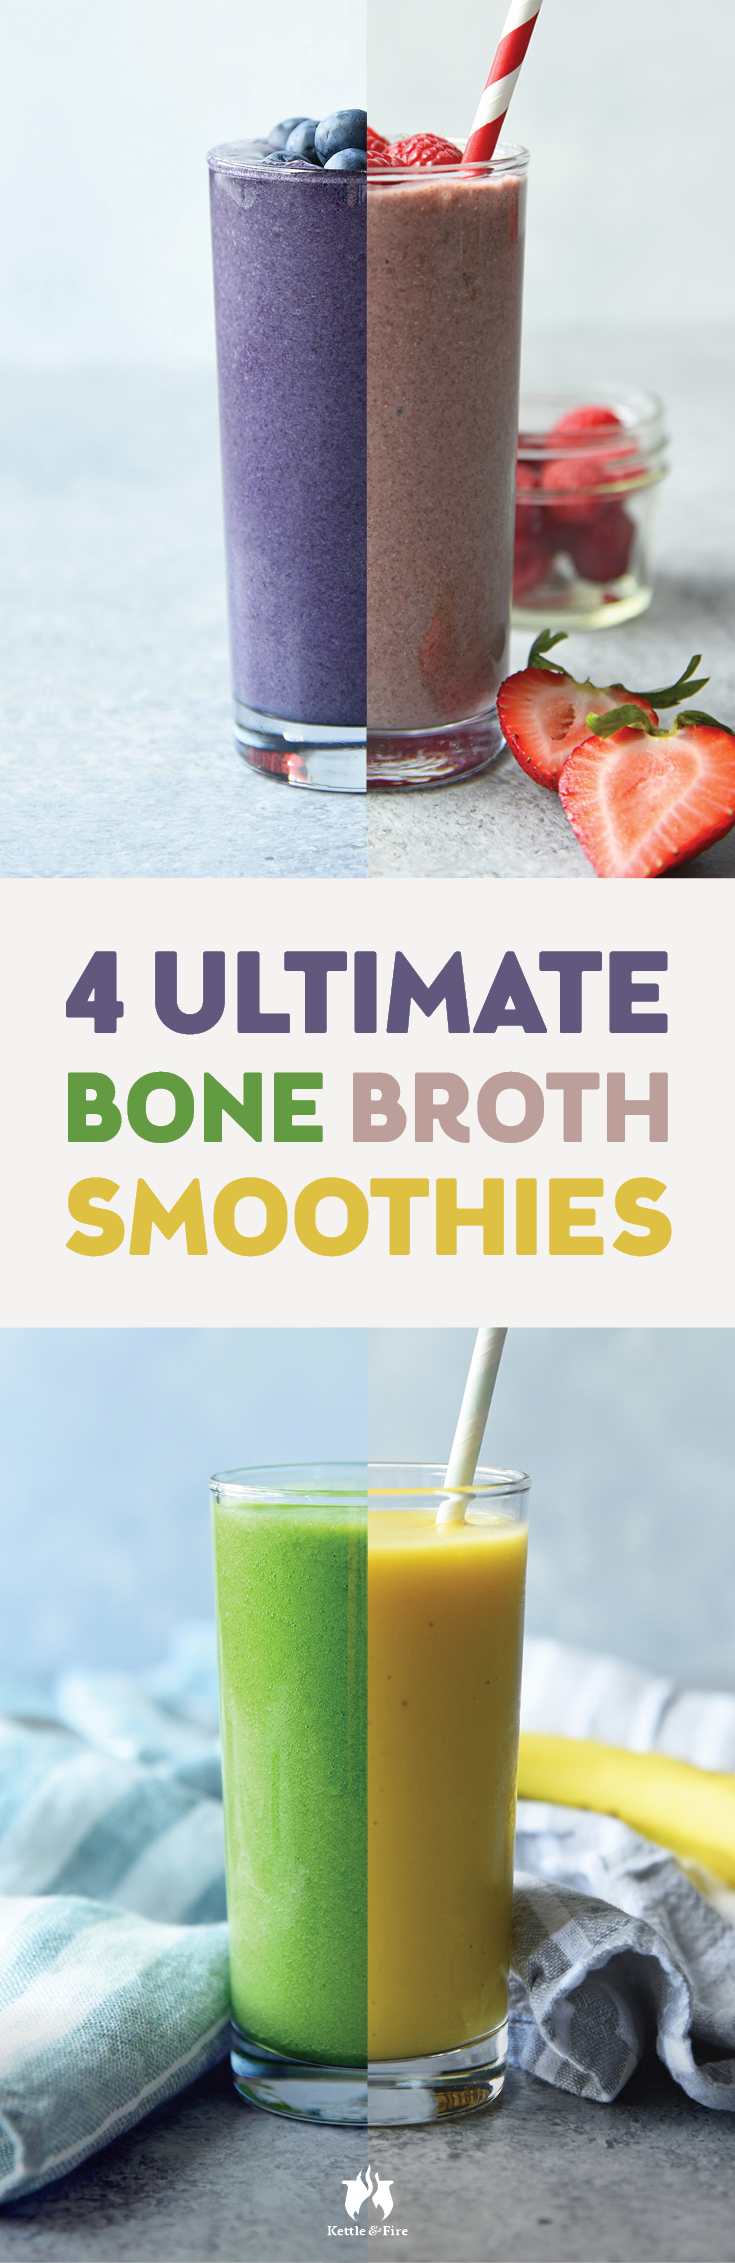 Keep up your healthy bone broth intake during the summer months with these 4 ultimate bone broth smoothies. Recipe video included!